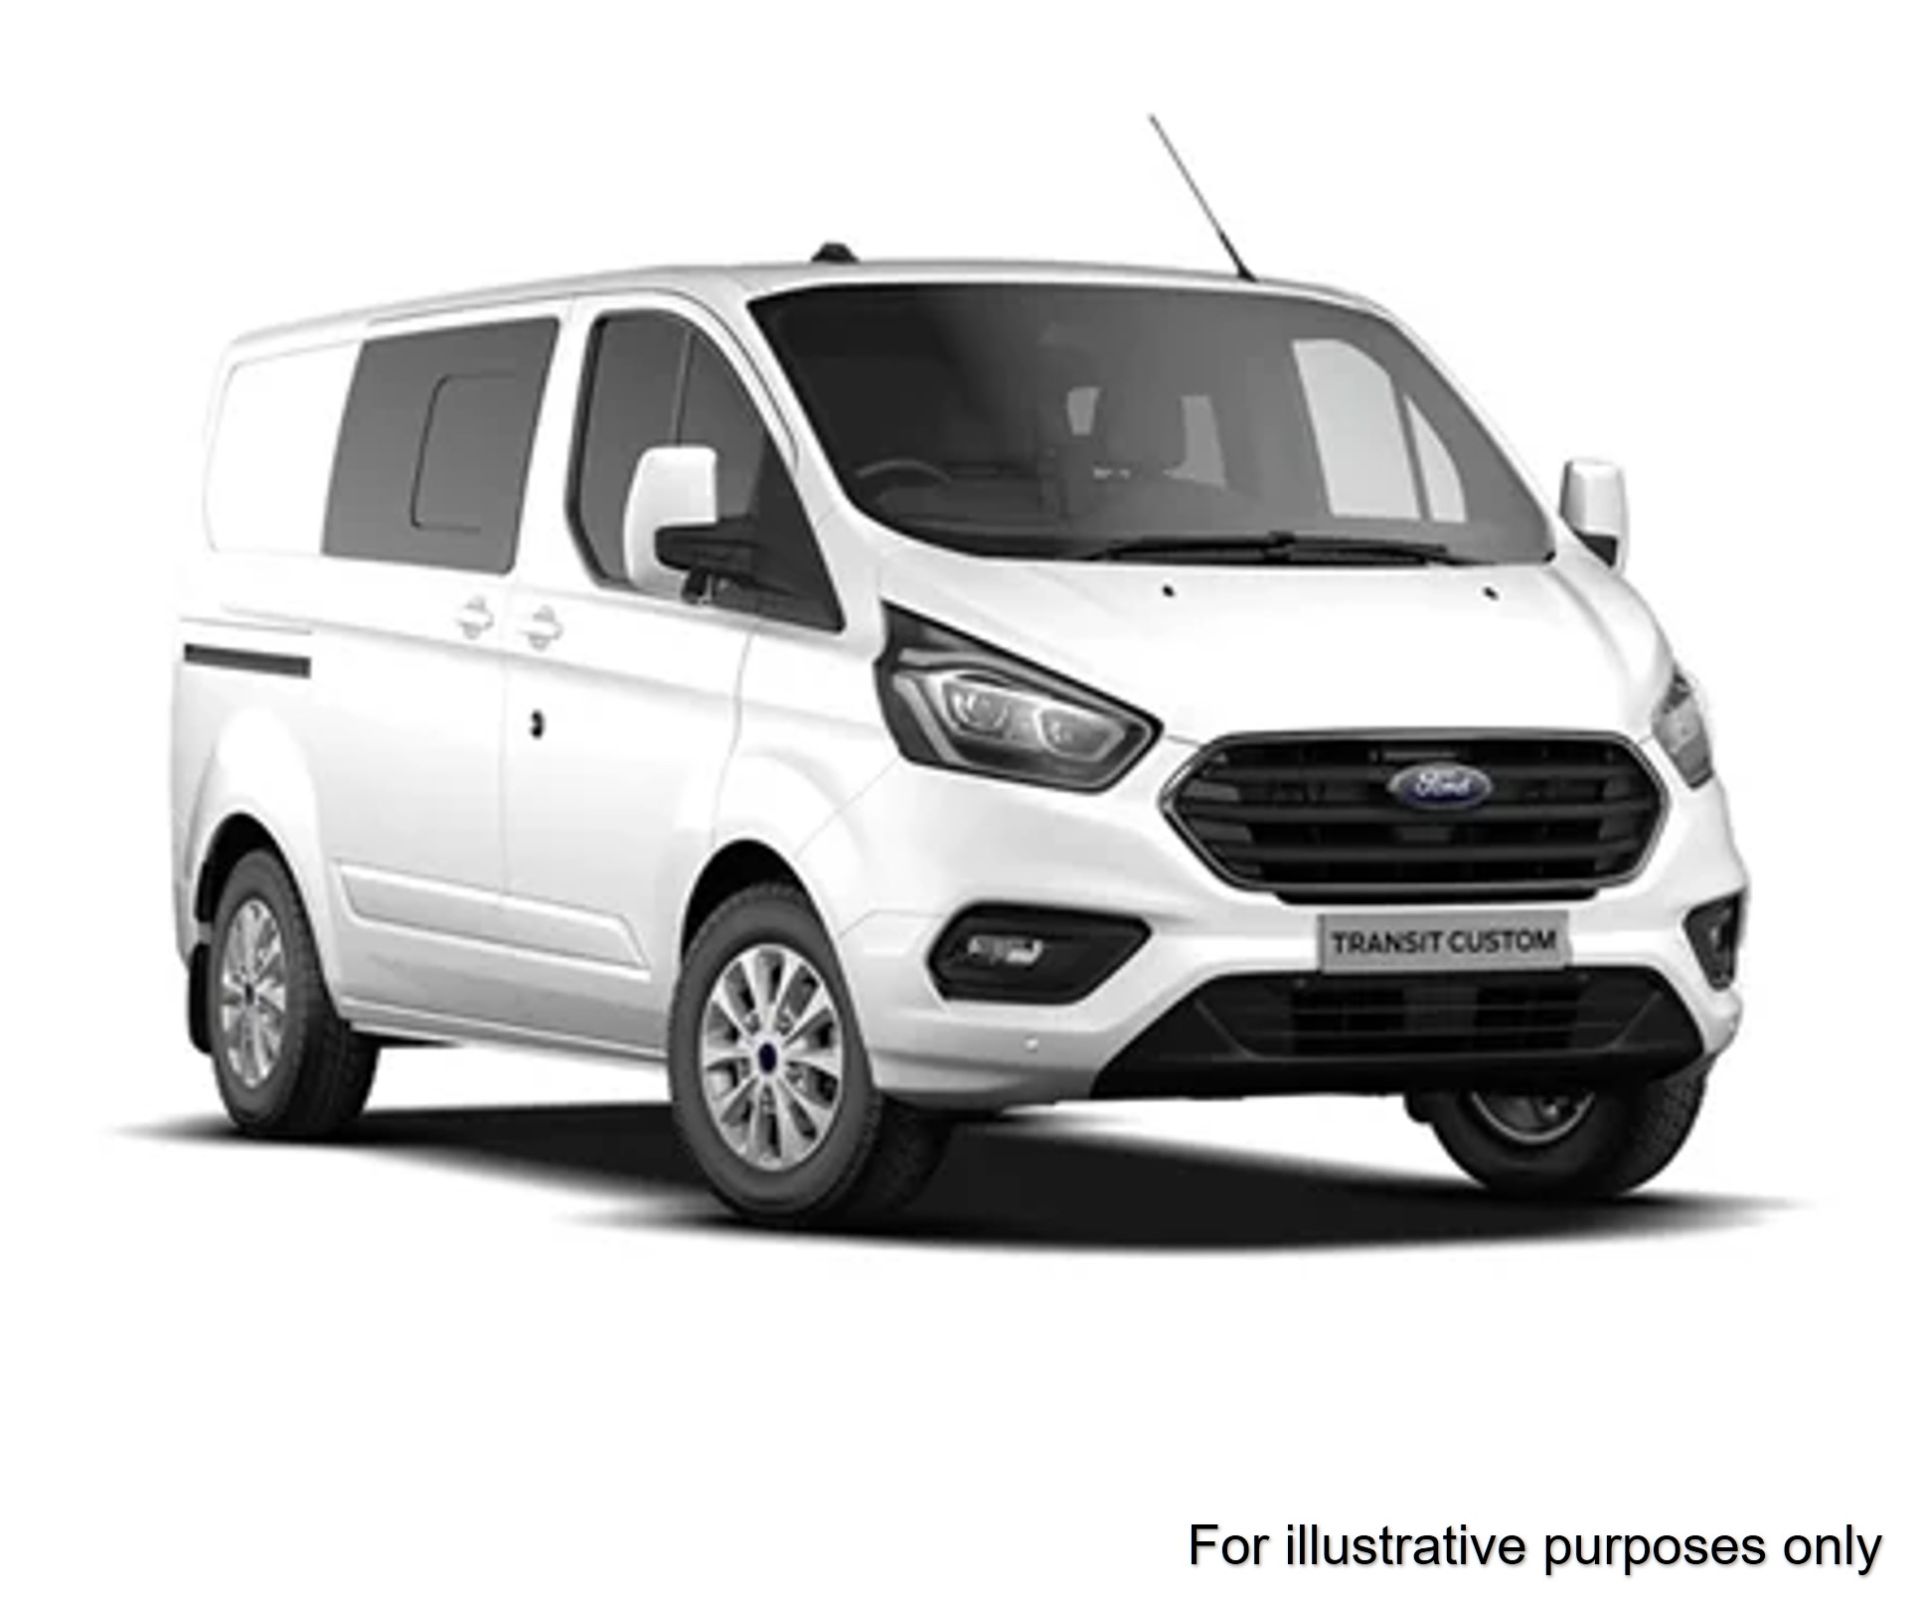 2019 Ford Transit Custom 300 L1 FWD 2.0 ECOBLUE 105PS LOW ROOF DOUBLE CAB TREND (FG69ZXO)